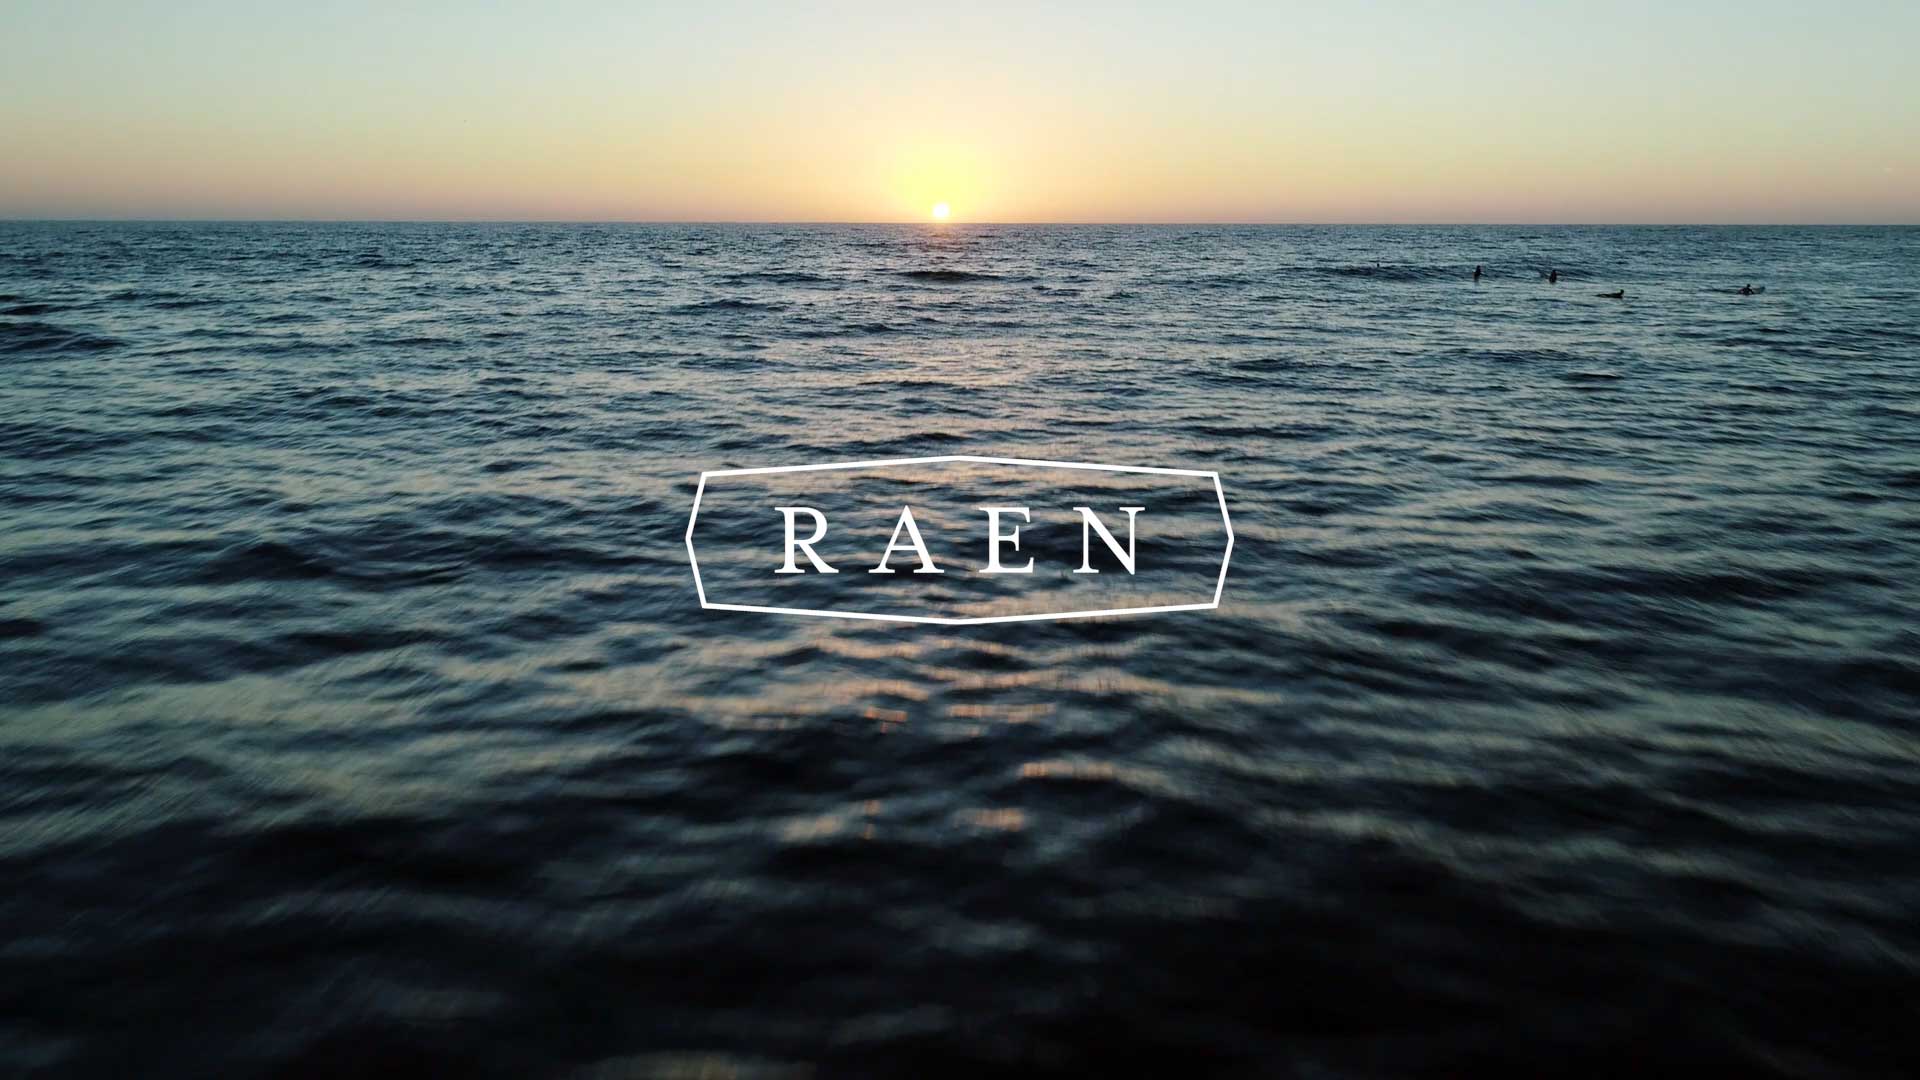 RAEN — “Inspired by the Classics”